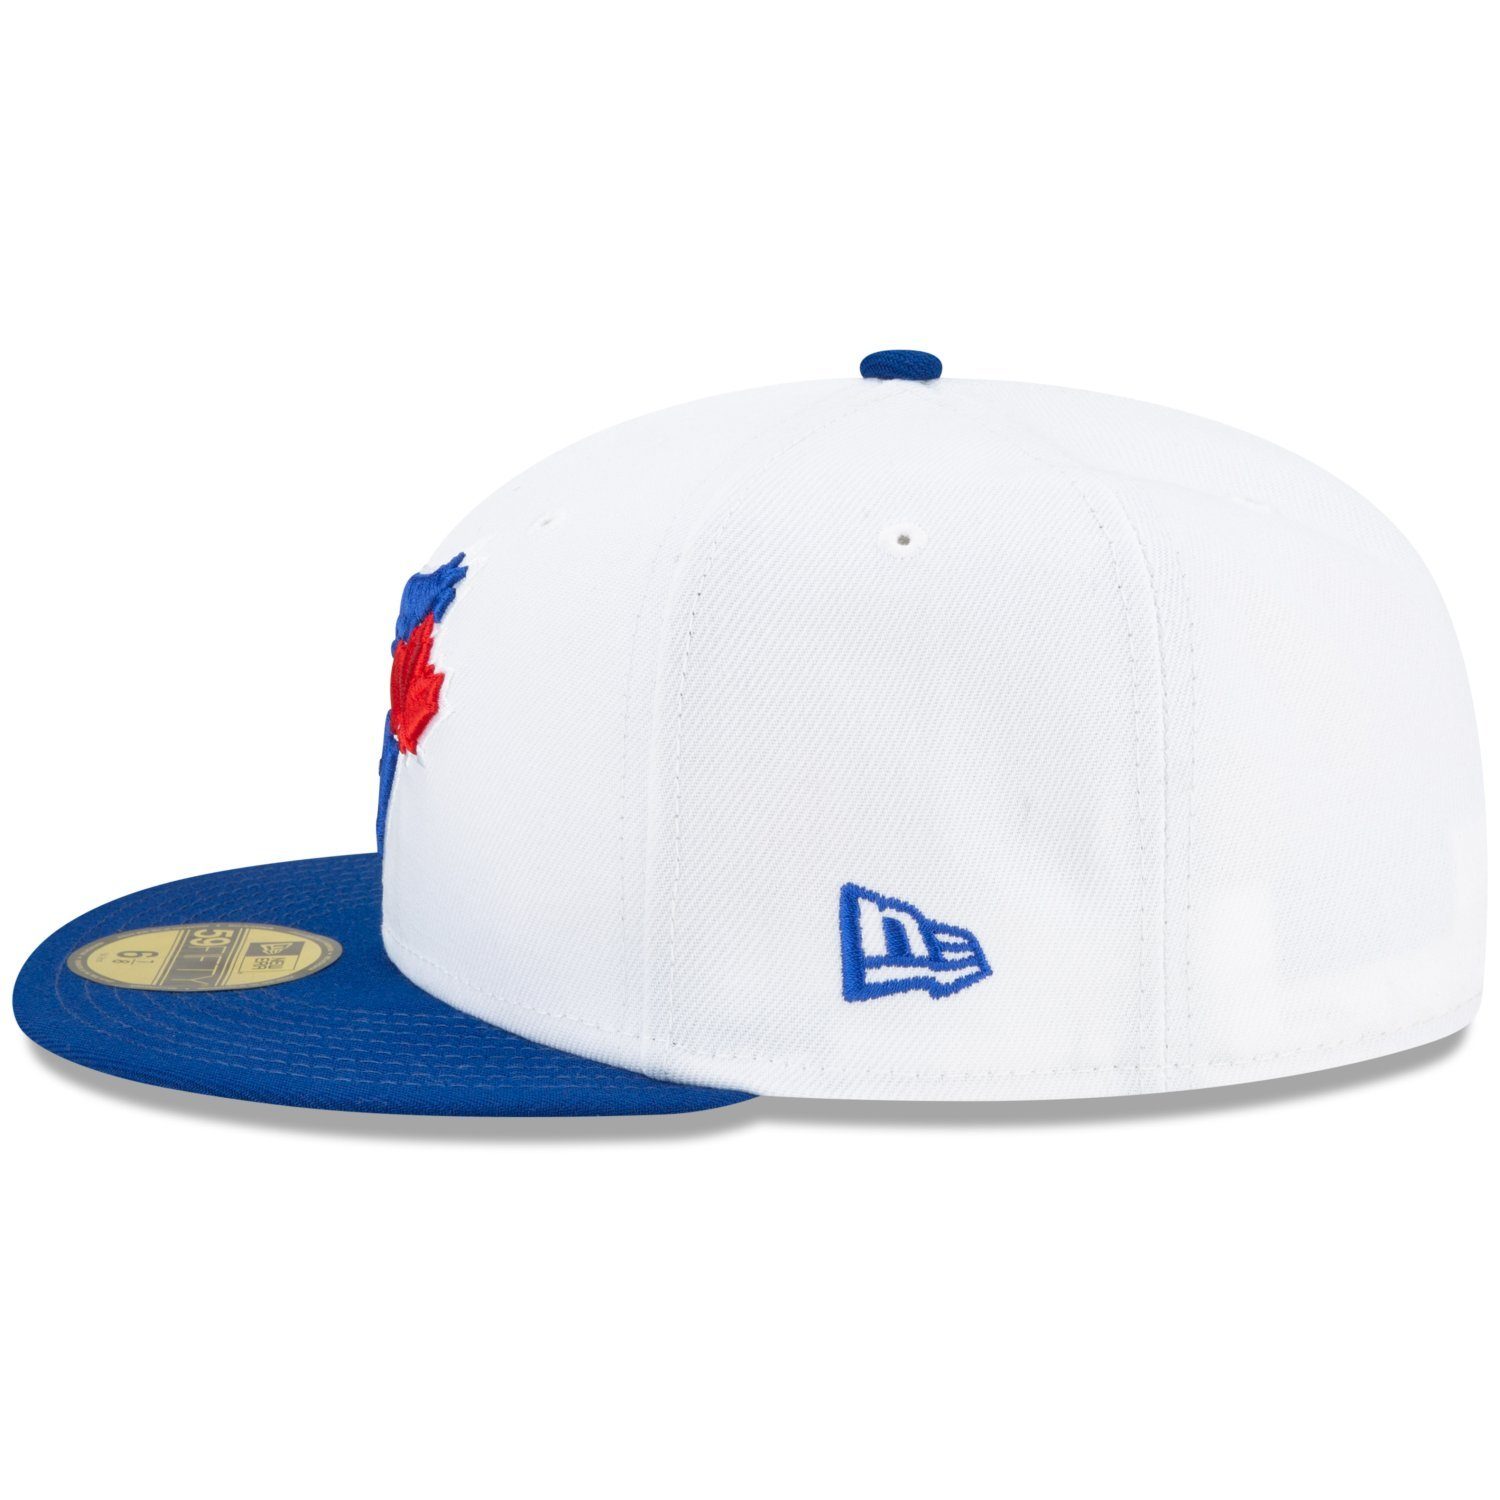 New 59Fifty Toronto Era WORLD Jays 1993 SERIES Fitted Cap